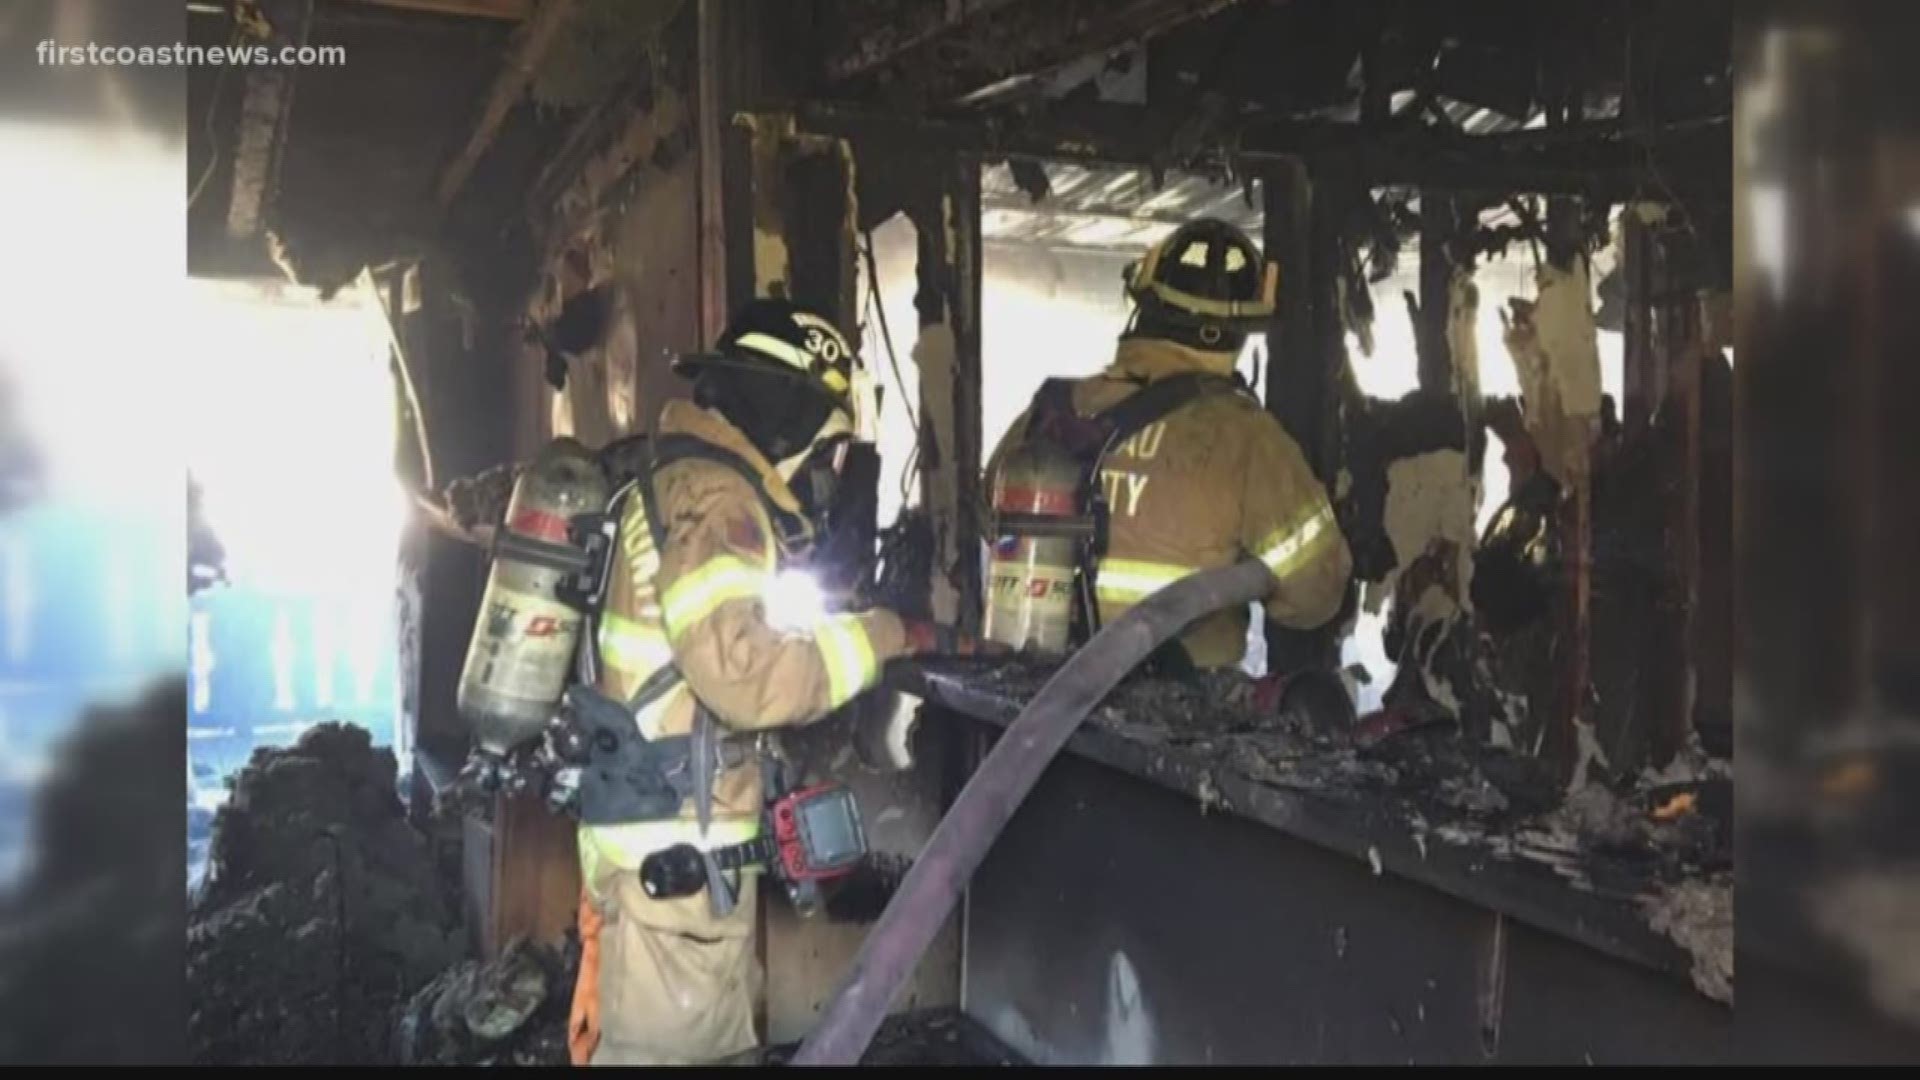 A Hilliard family lost their home after it was engulfed in flames Sunday afternoon, according to Nassau County Fire Rescue (NCFR).